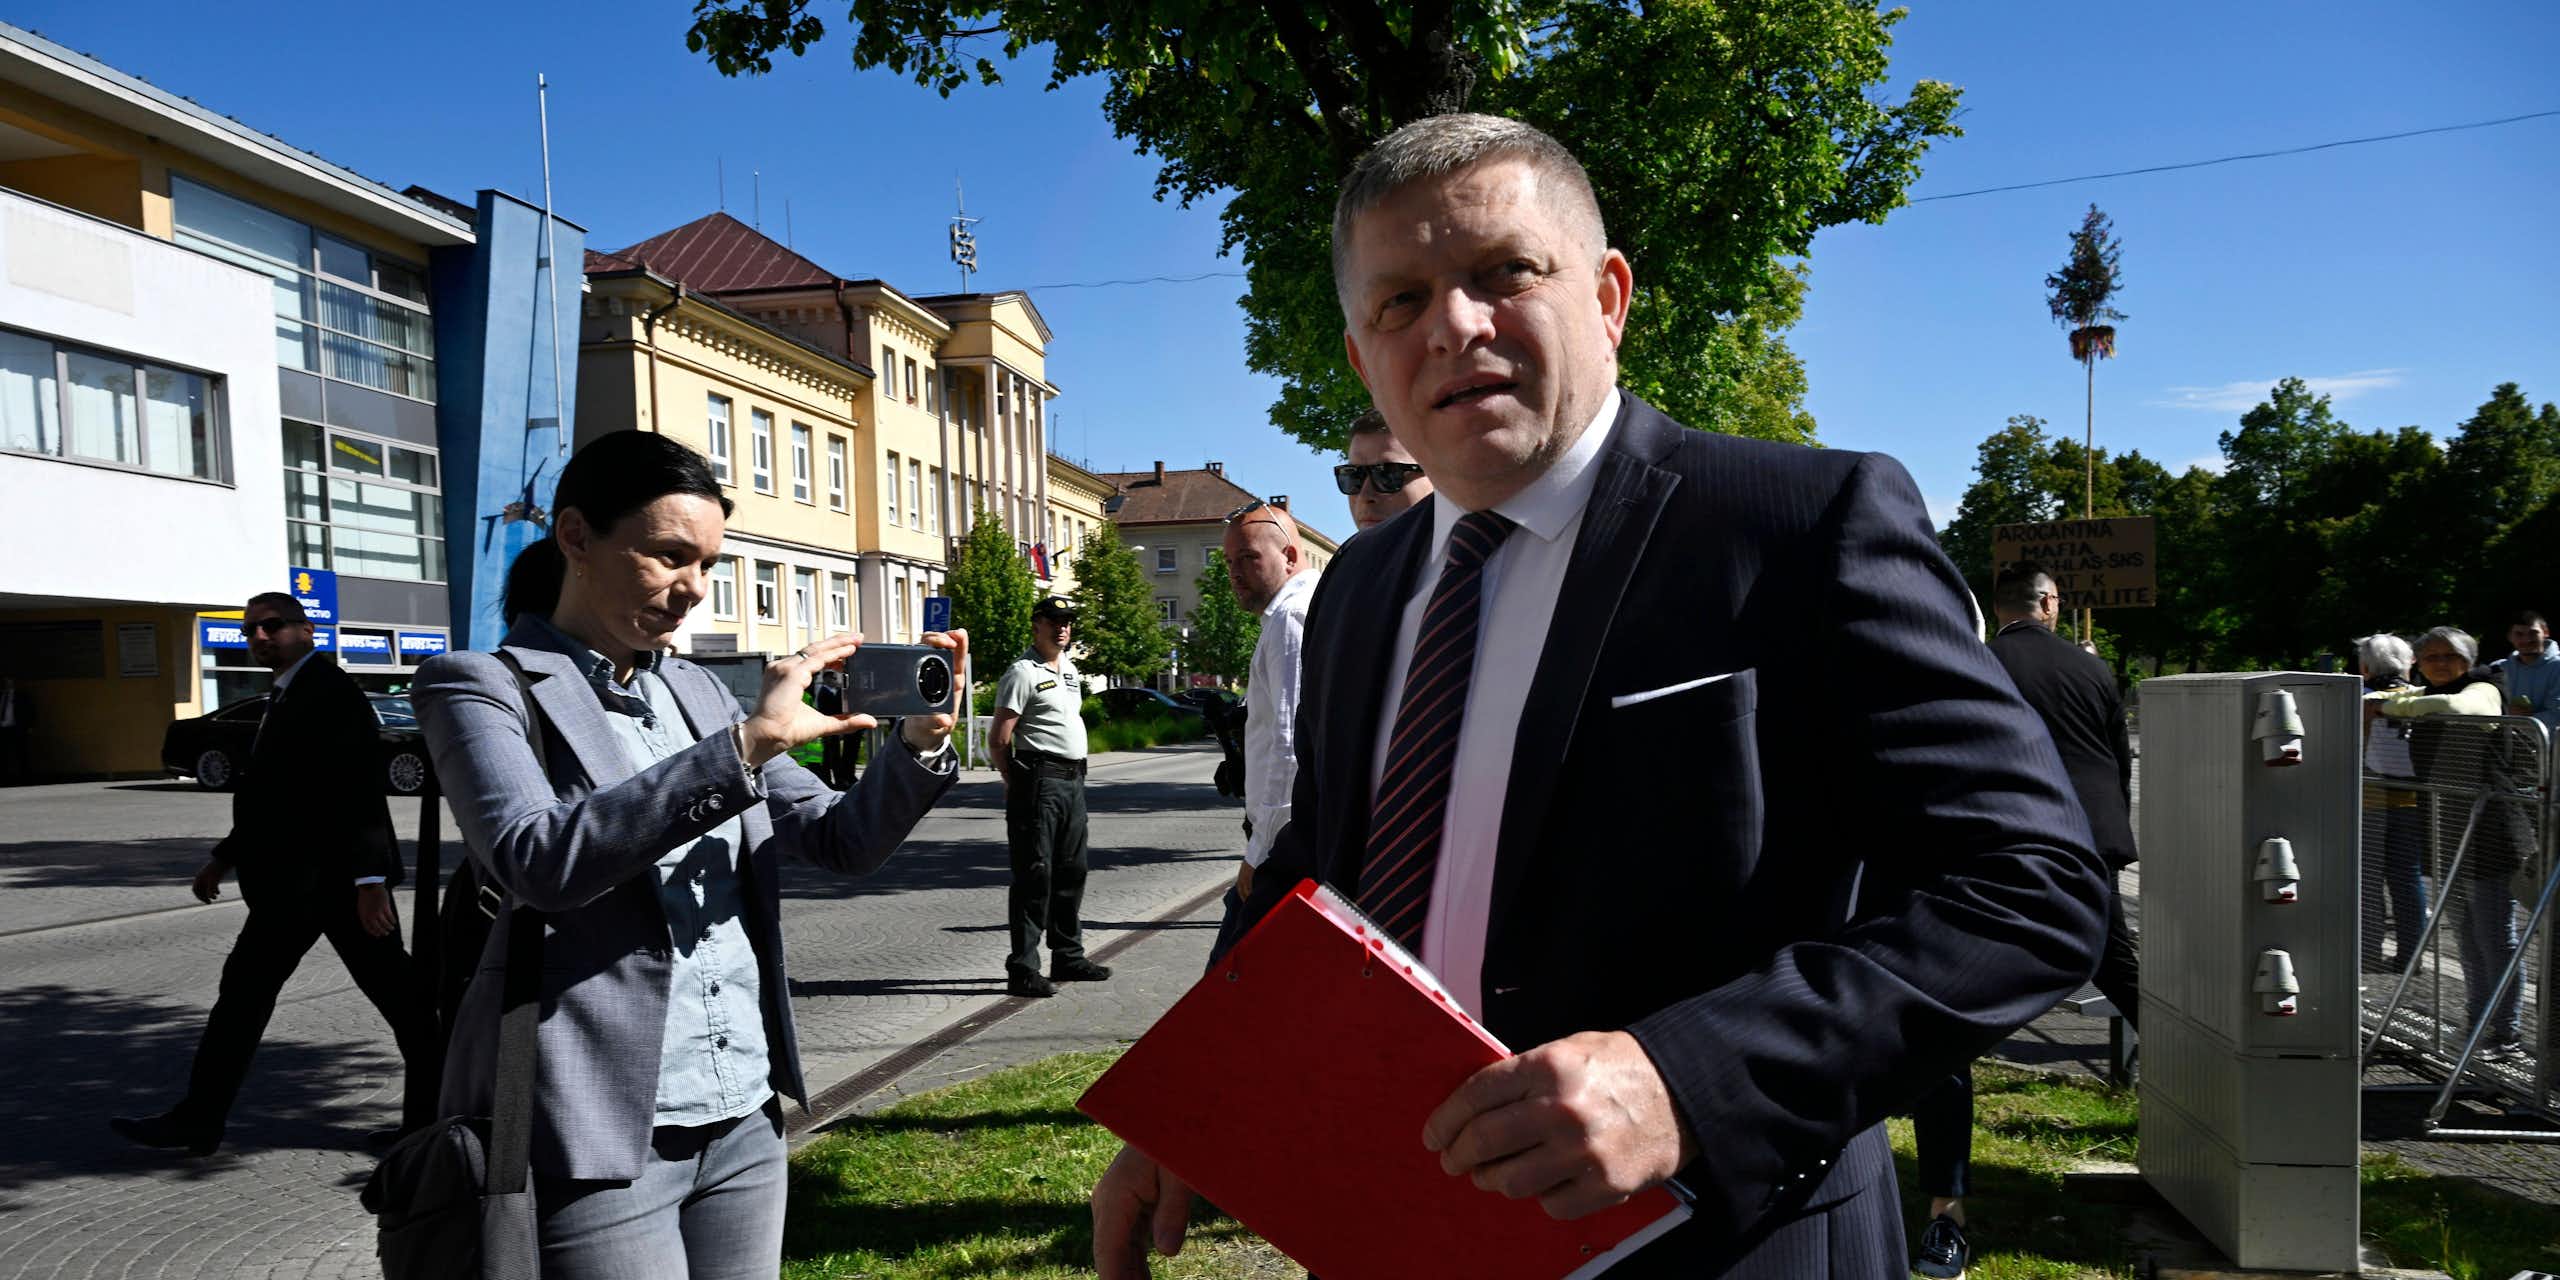 Robert Fico holding a binder of documents with security in the background.